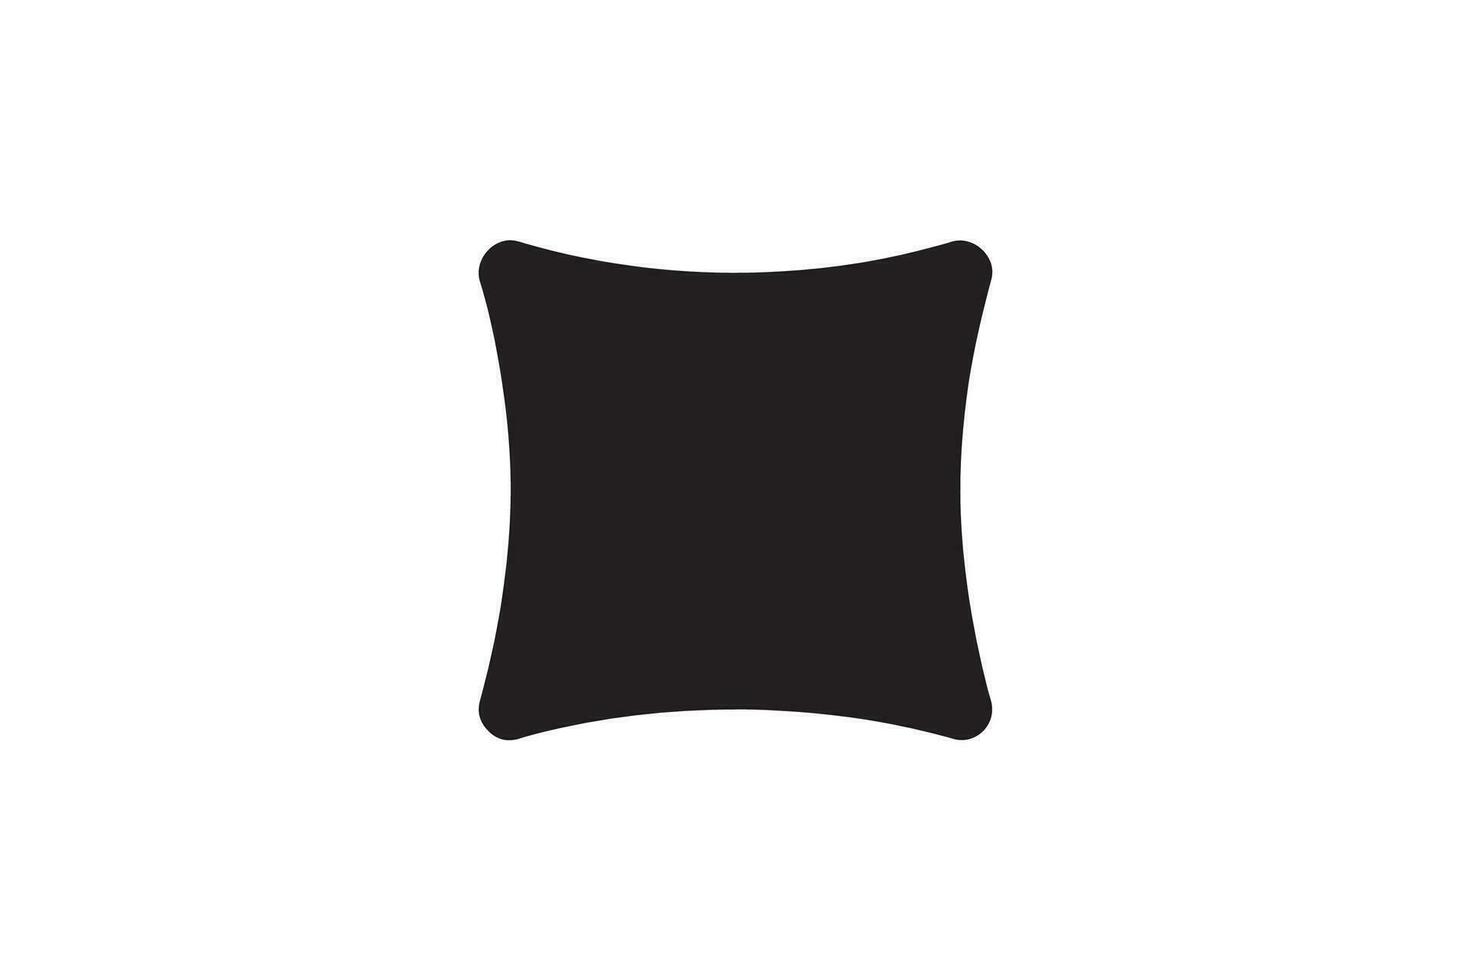 Pillow silhouette black color in white background vector